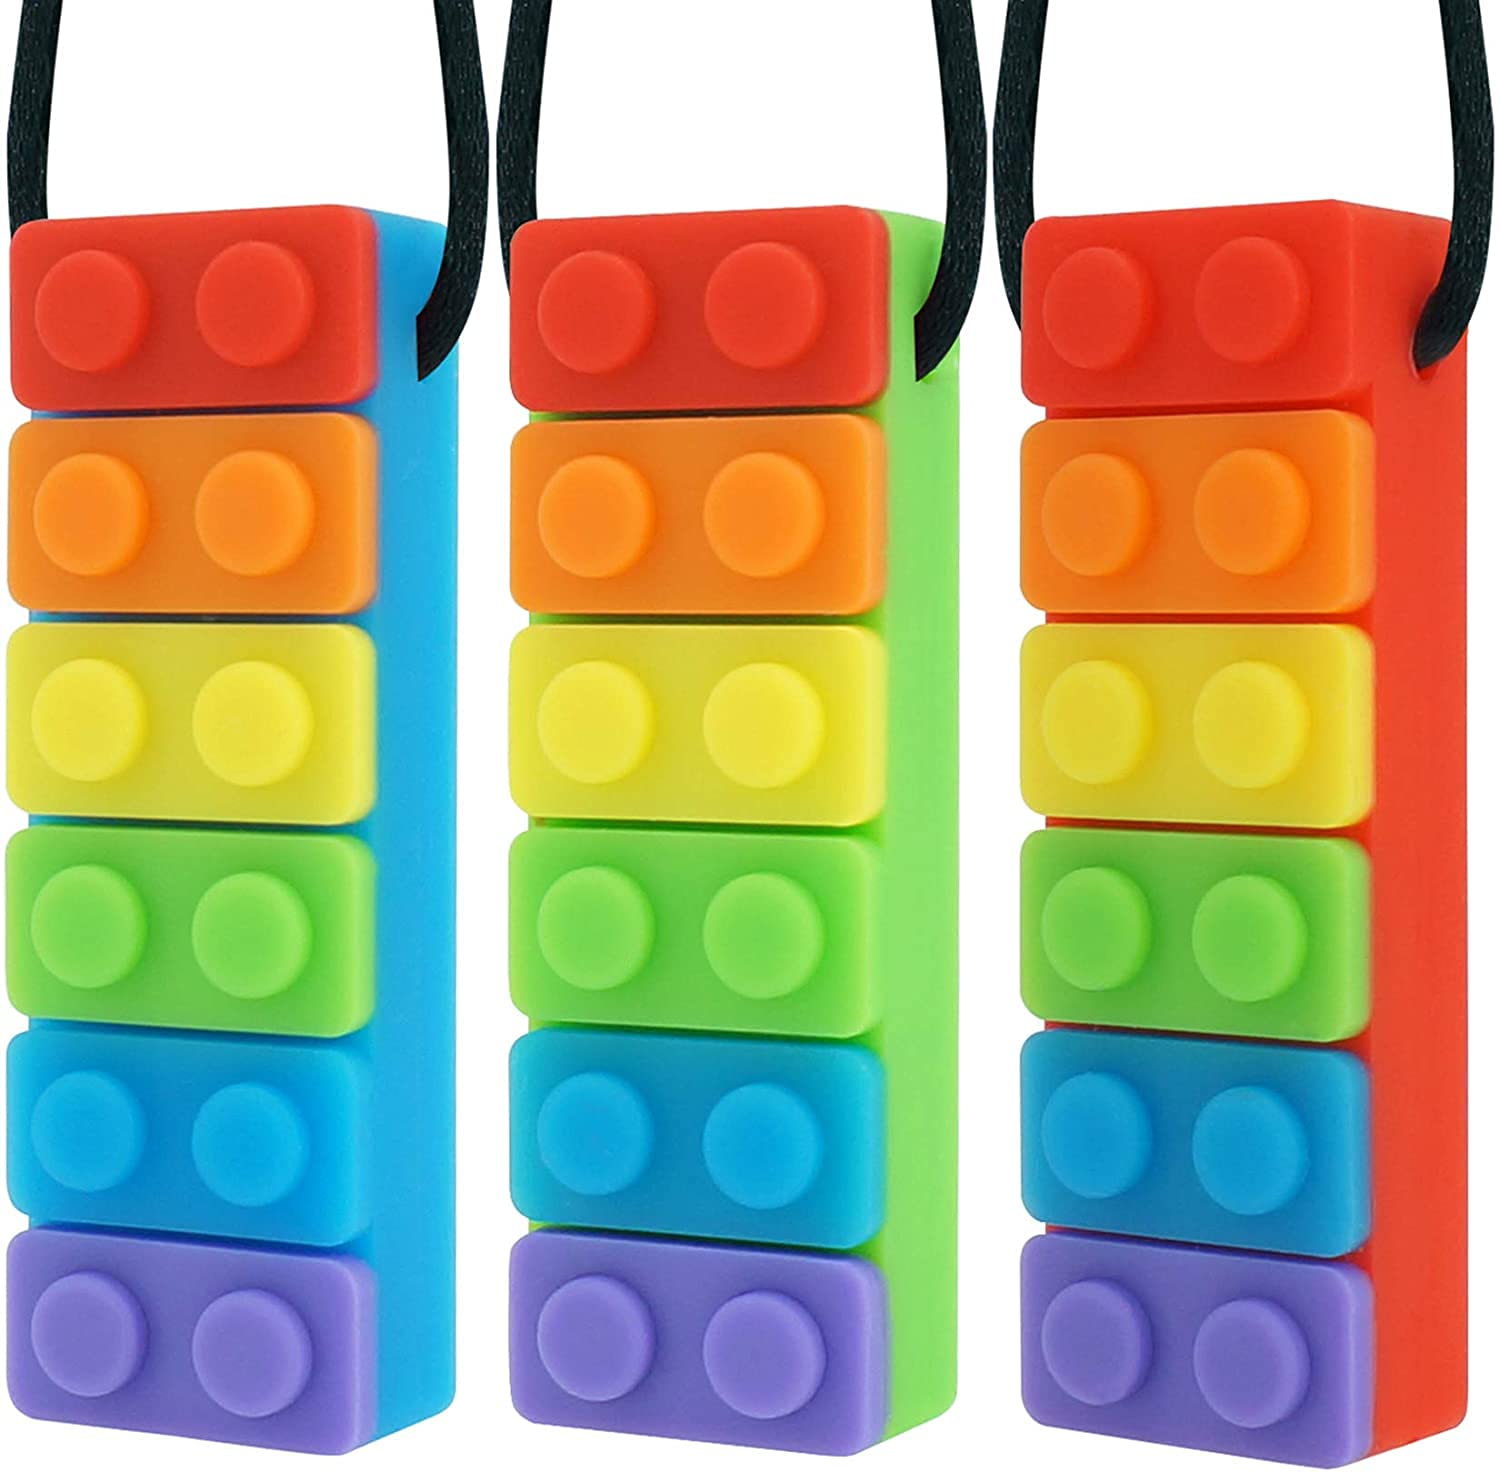 Sensory Chew Necklaces, 3 Pack Seeway Rainbow Teething Chew Toys for Autistic Children, Autism ADHD SPD, Oral Motor, Anxiety